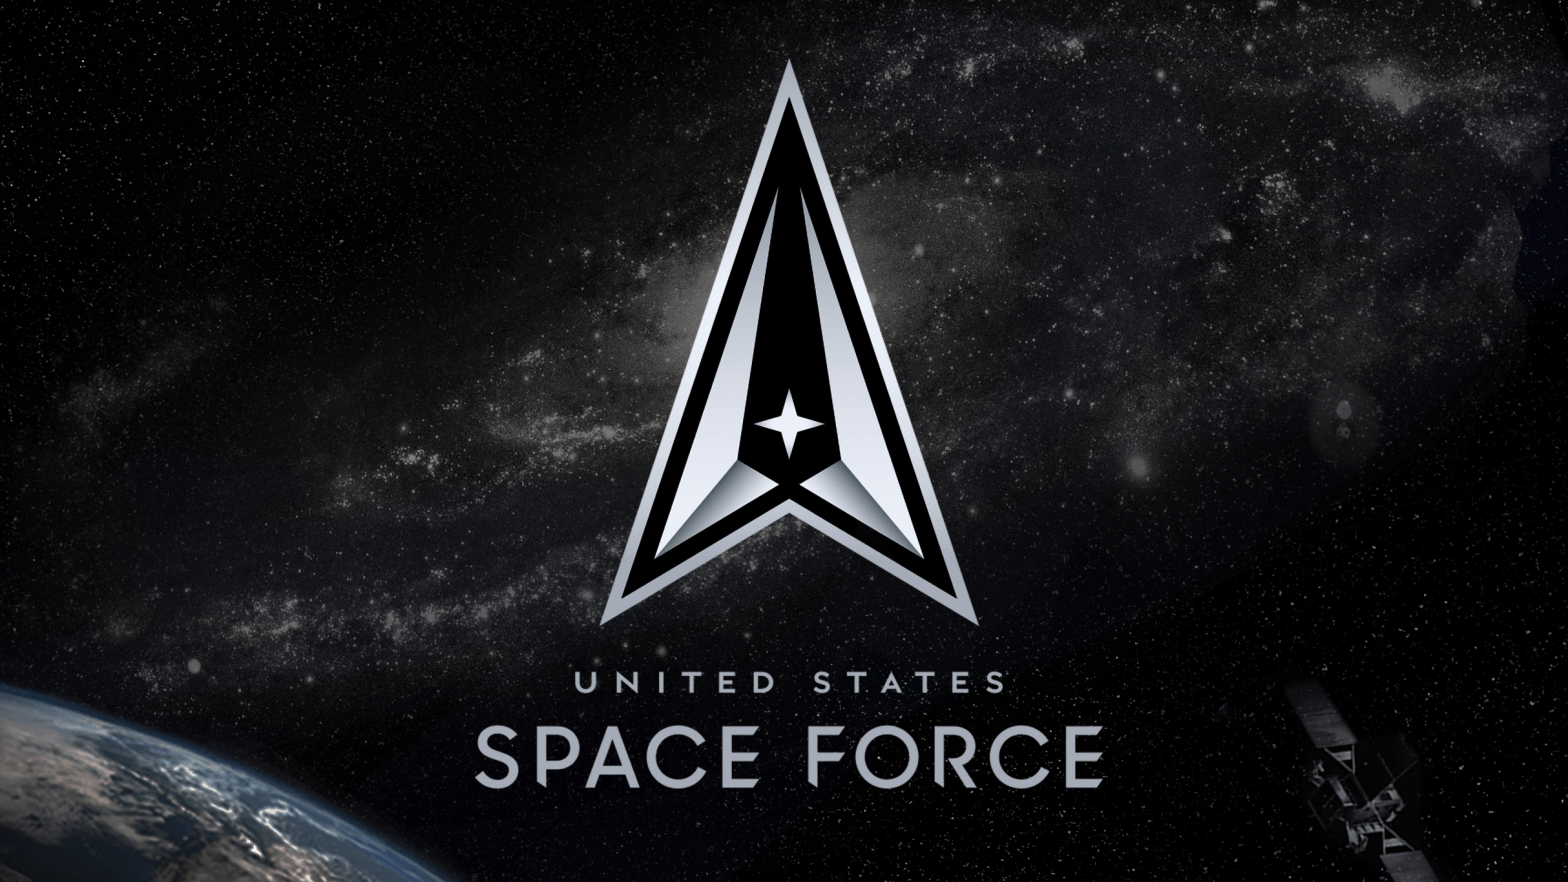 Image: United States Space Force